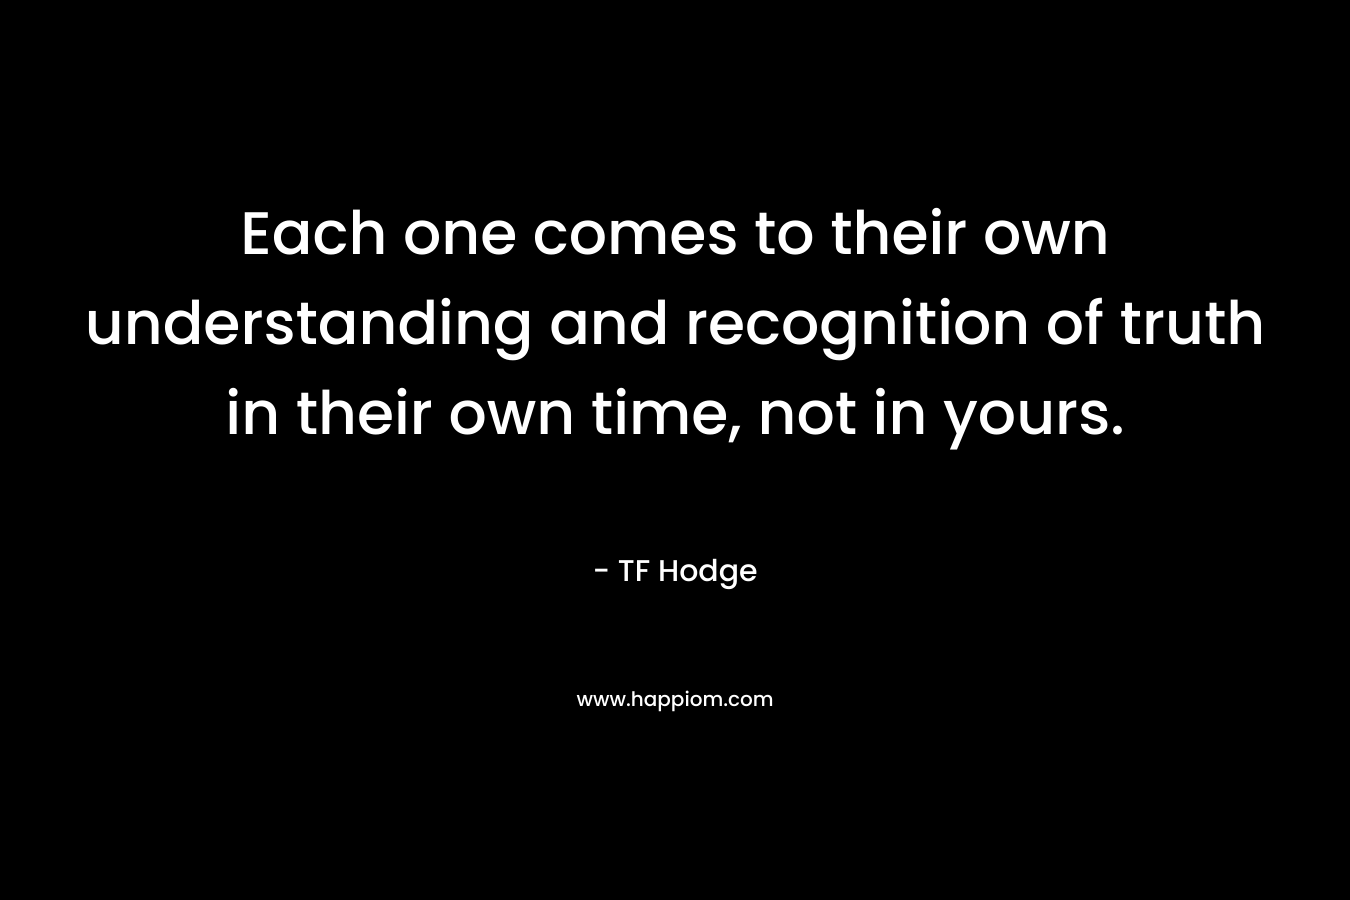 Each one comes to their own understanding and recognition of truth in their own time, not in yours. – TF Hodge